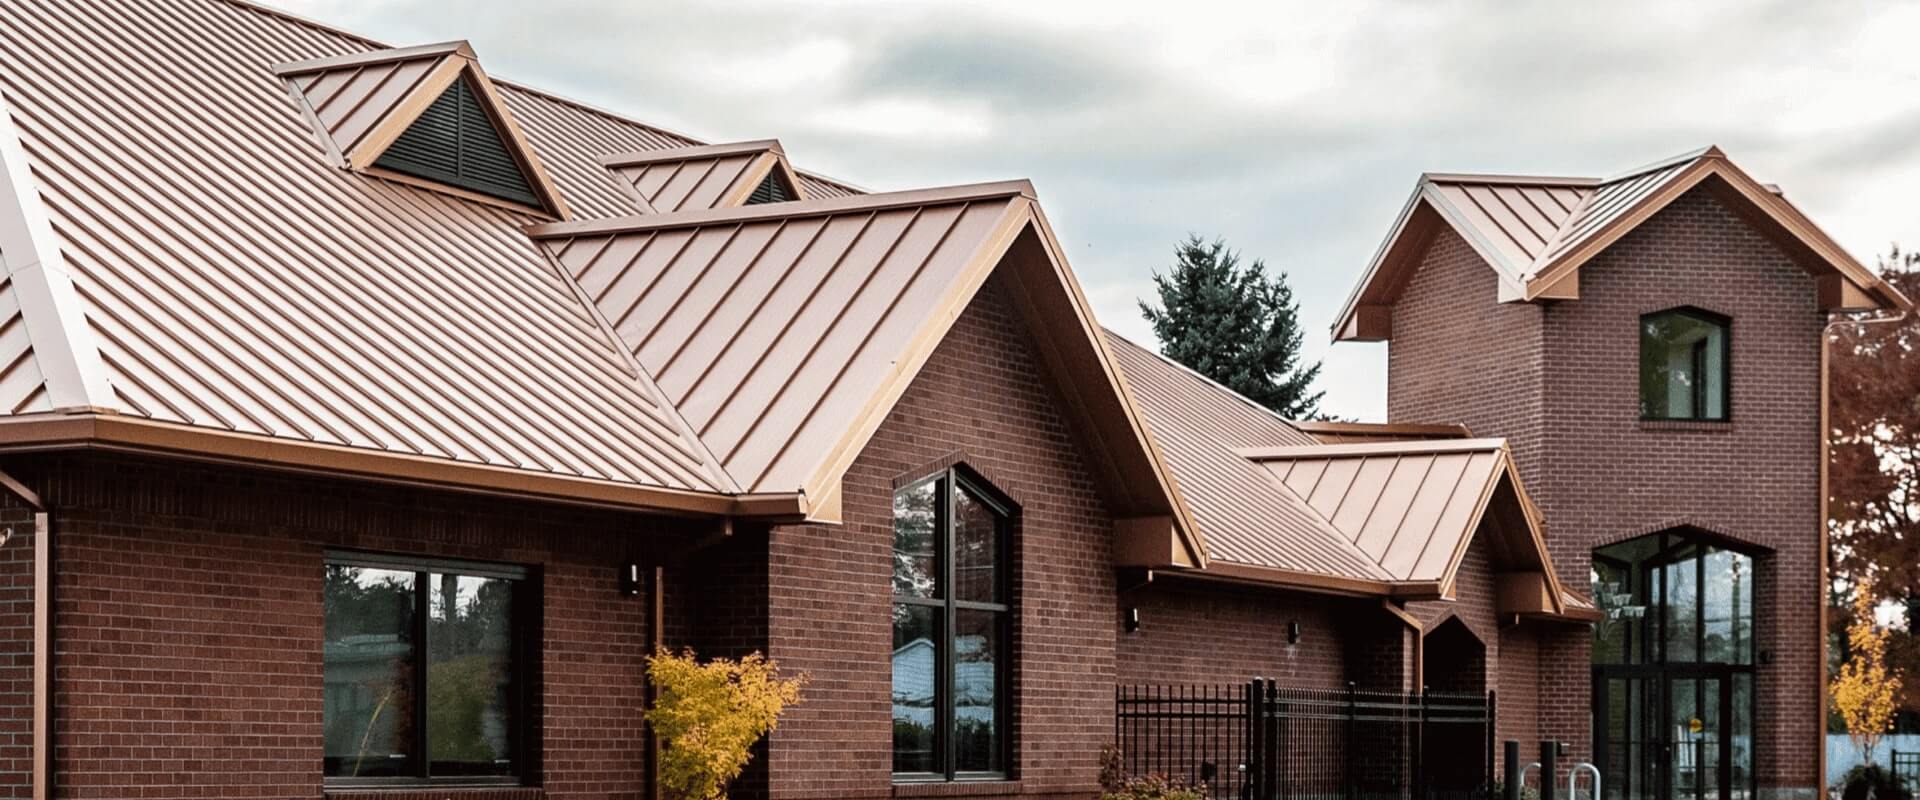 commercial building with standing seam copper metal roof